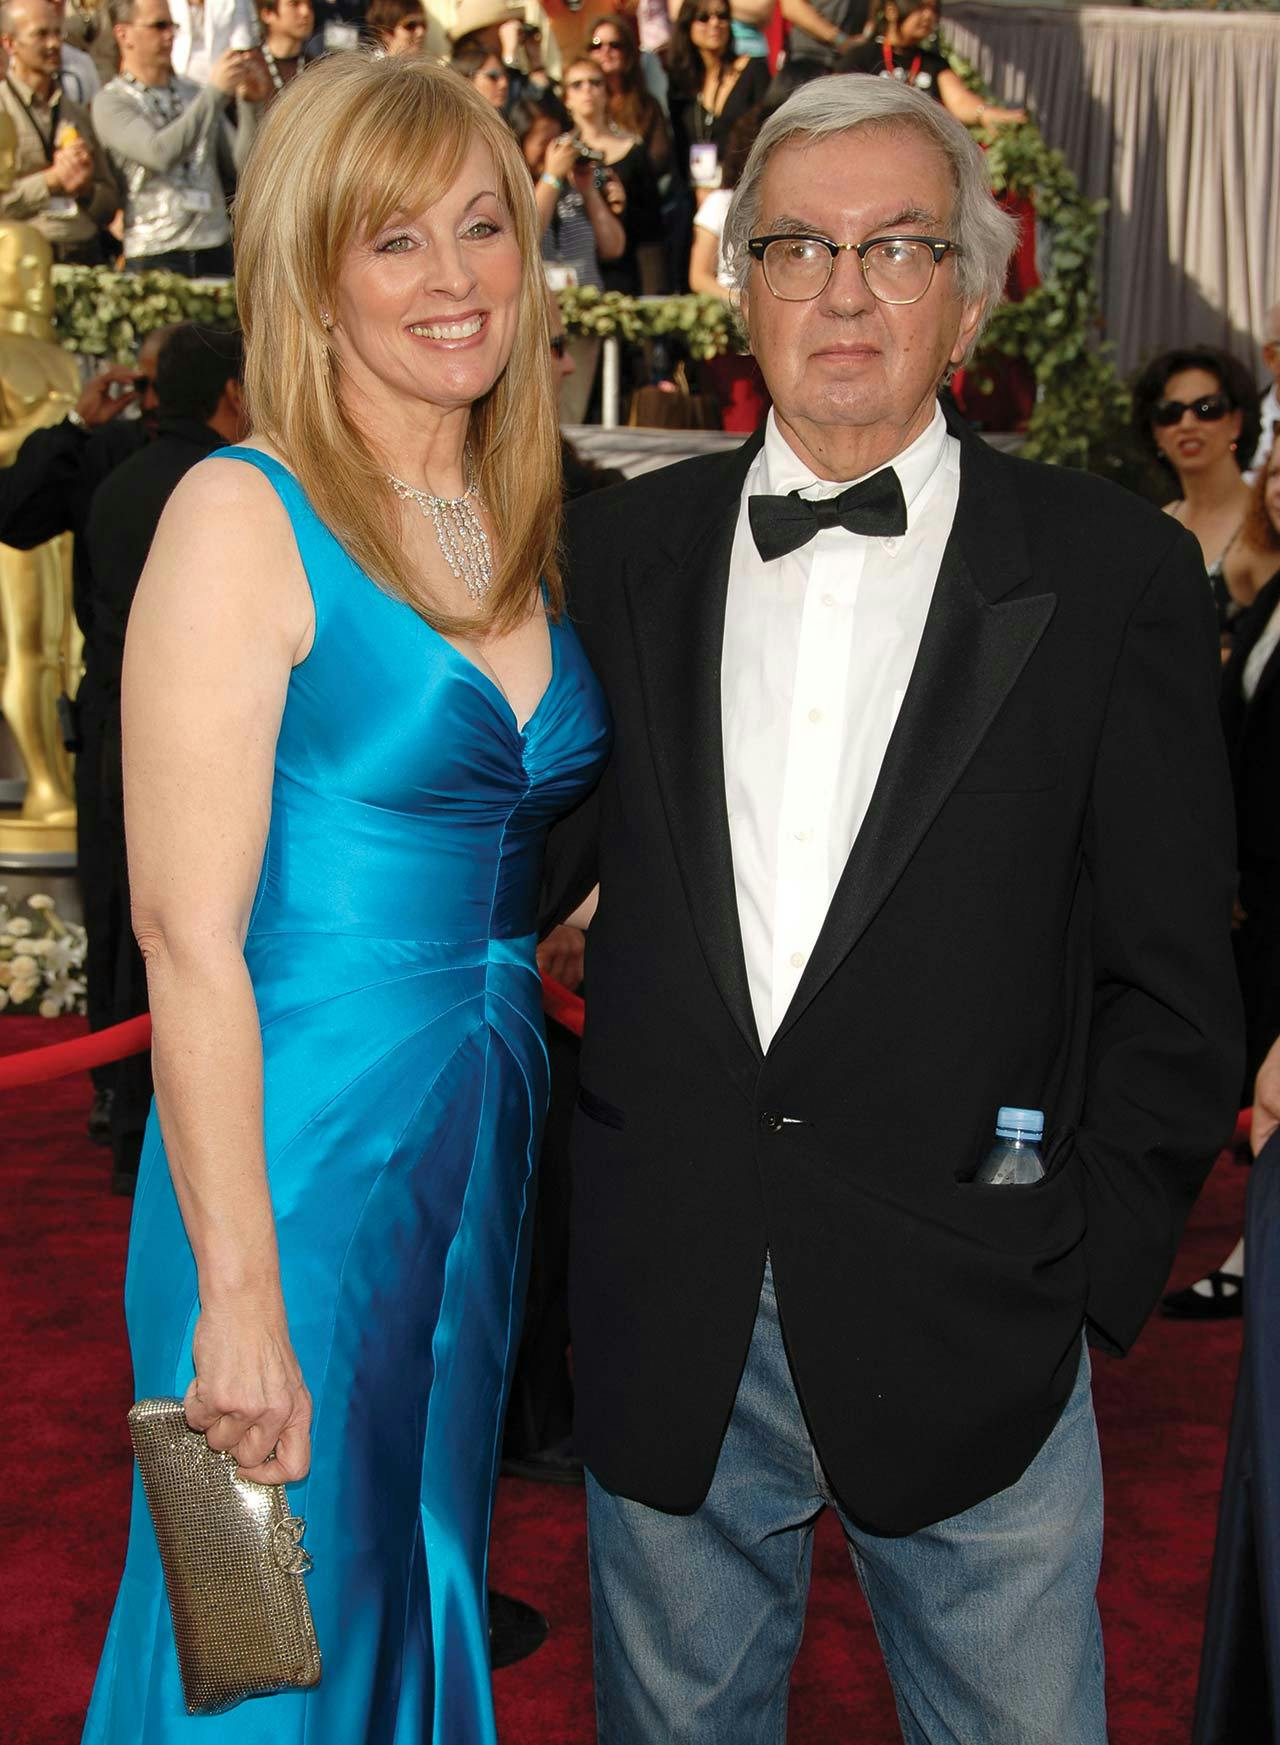 Larry McMurtry in his late sixties, standing on the red carpet with Ossana at the 2006 Academy Awards.